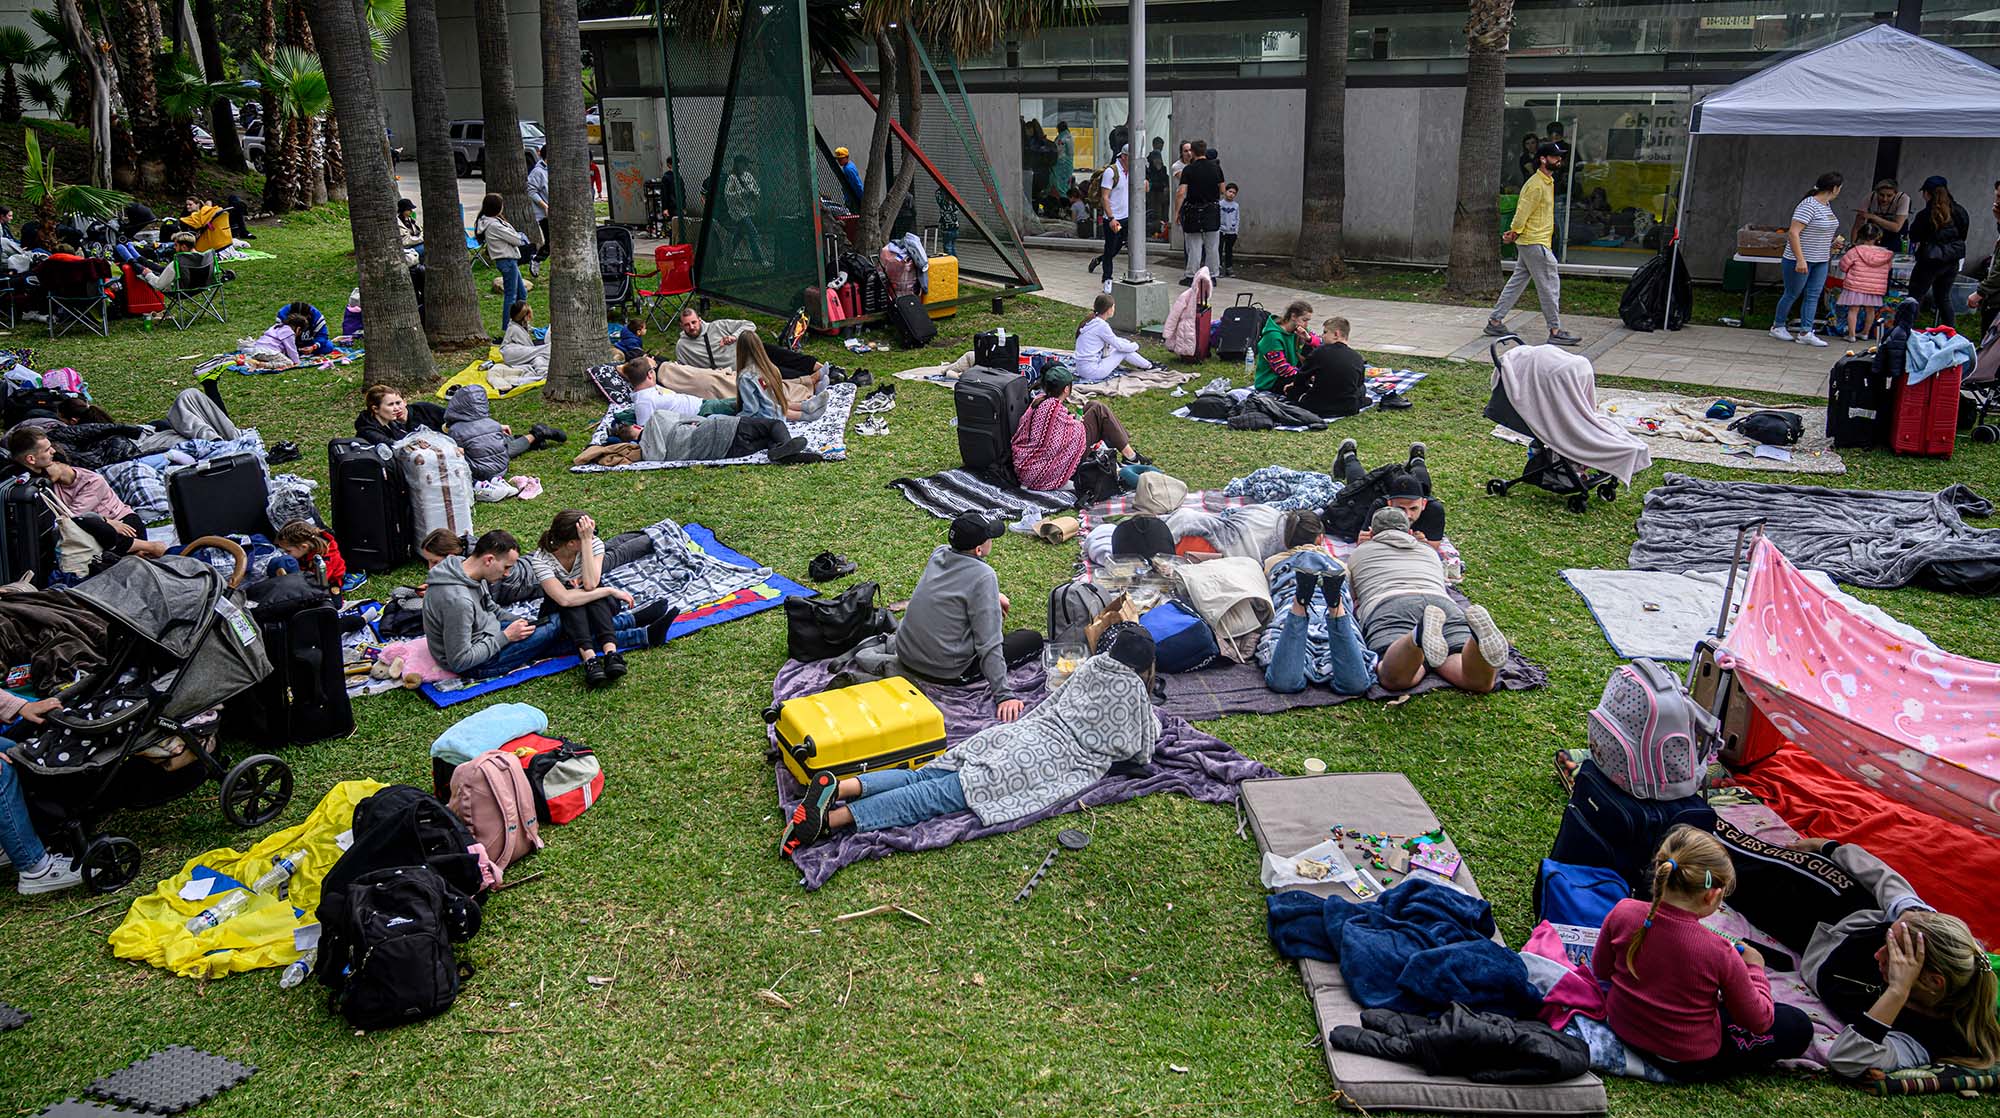 Photo of Ukrainian refugees awaiting entry into the US. They sit and lay on blankets on a patch of grass. Many wearing sweatshirts and jeans and look away from the camera towards a gray tent and wall. The refugees sit amongst their suitcases and there is a mix of families and groups of young people.